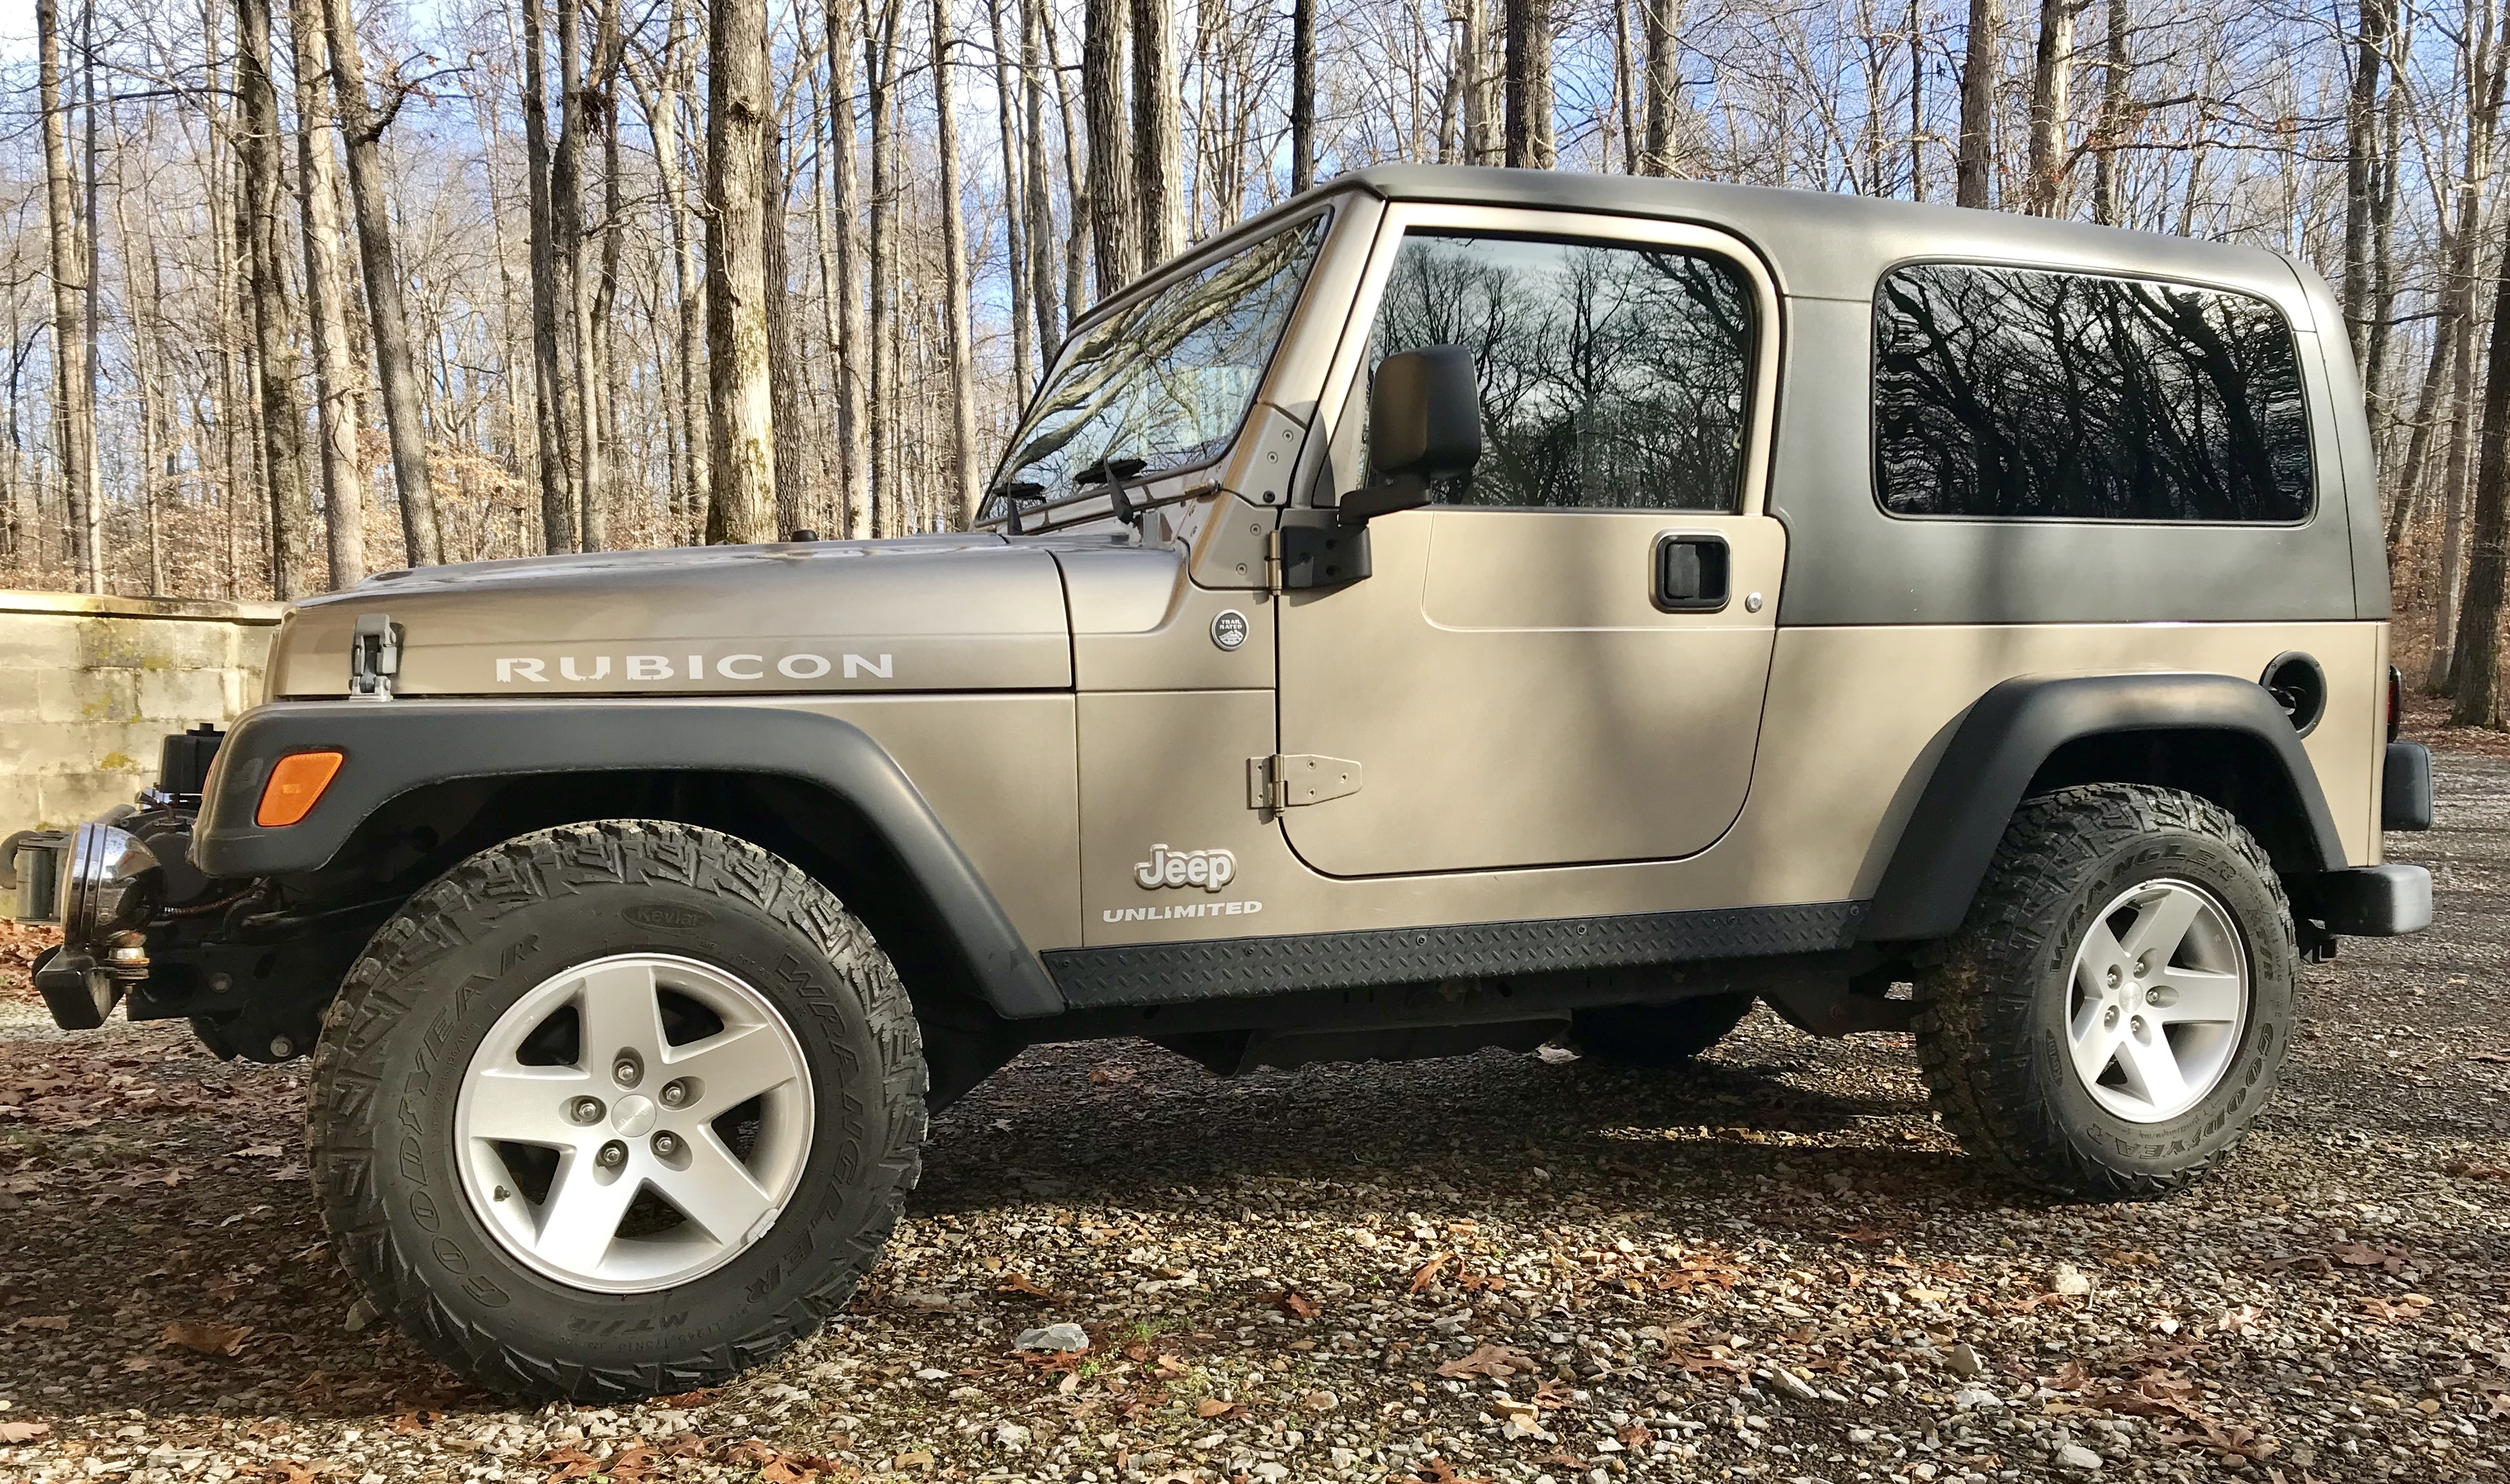 2005 Jeep (LJ) Rubicon Unlimited - 38,500 miles | Expedition Portal